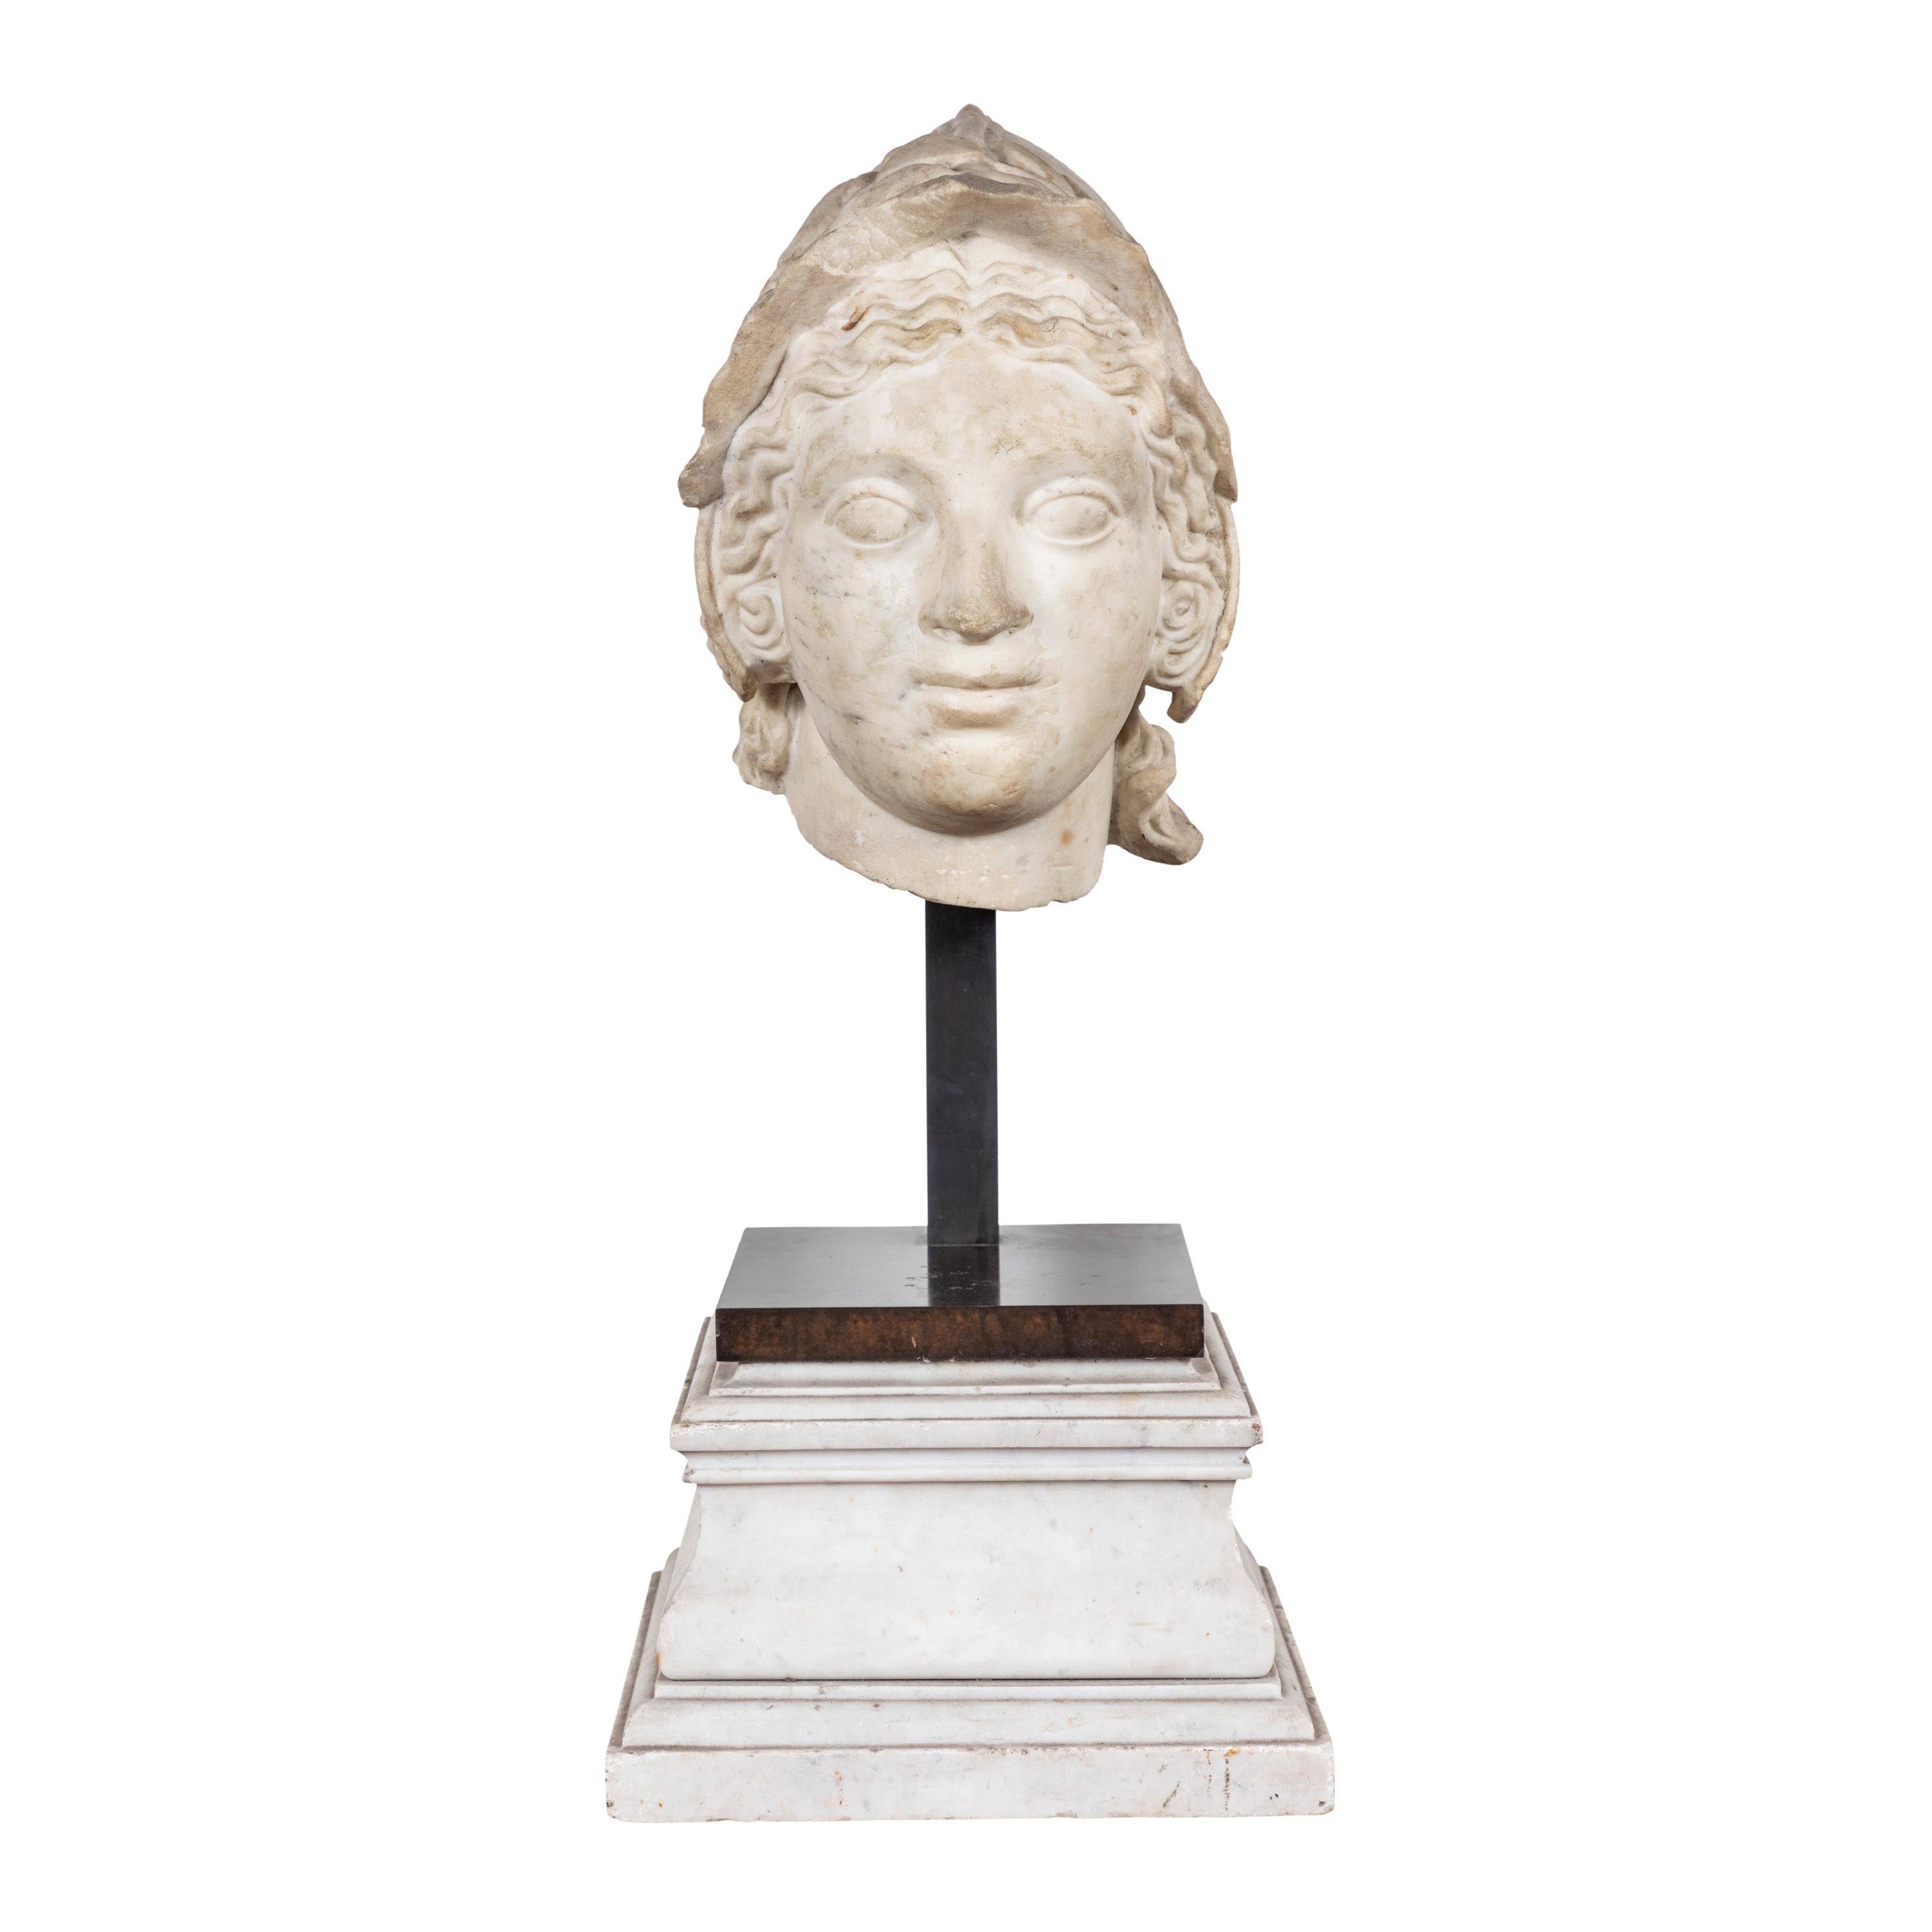 Early 1600s, Marble Bust of Athena